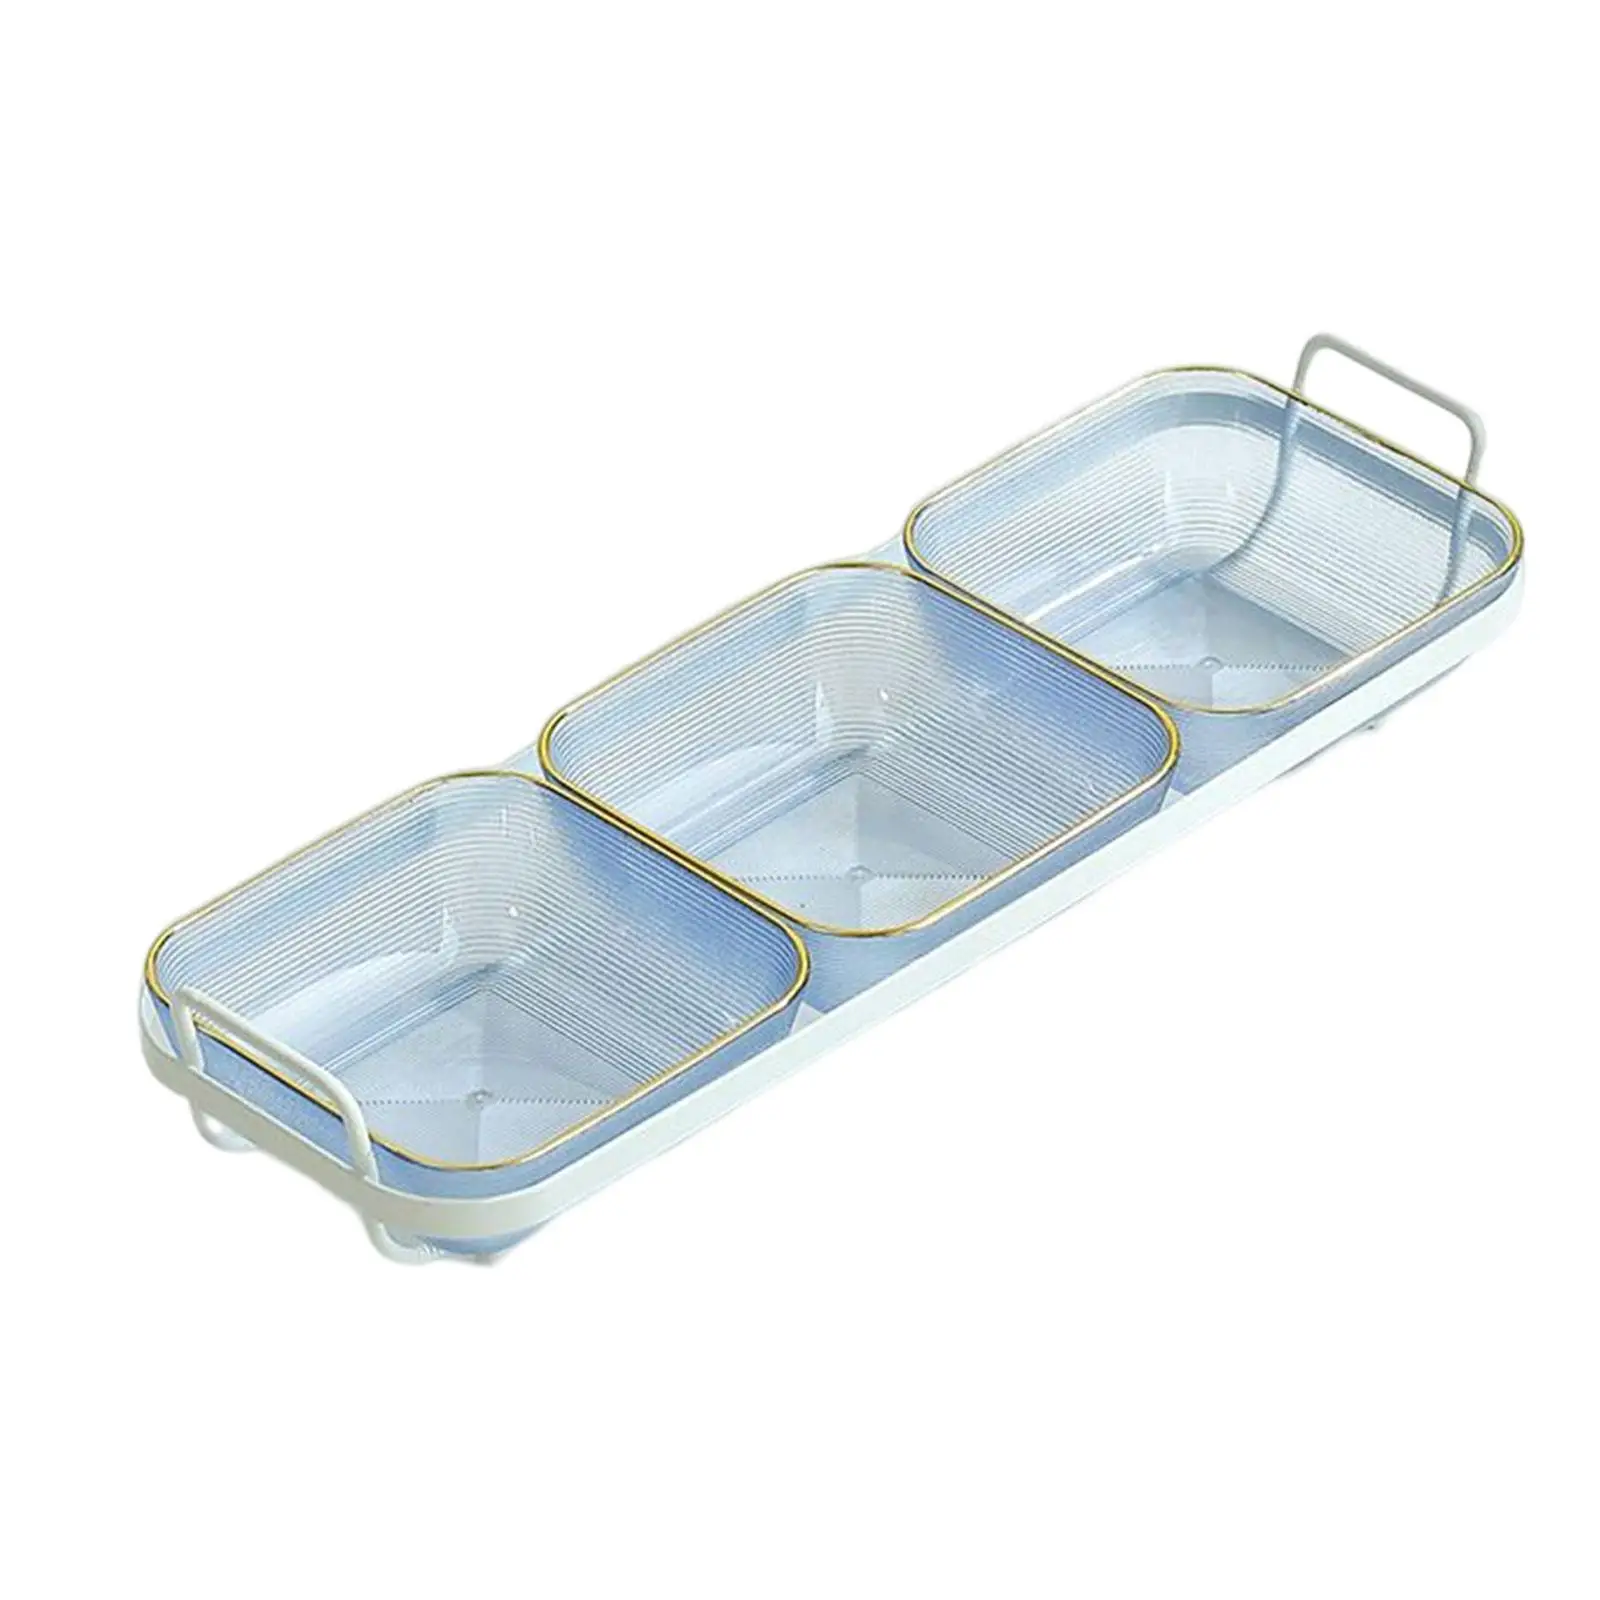 snack Serving Tray Multifunctional Holder Fruit Dessert Plate Stand for Candy Dinner Baby Shower Tea Party Living Room